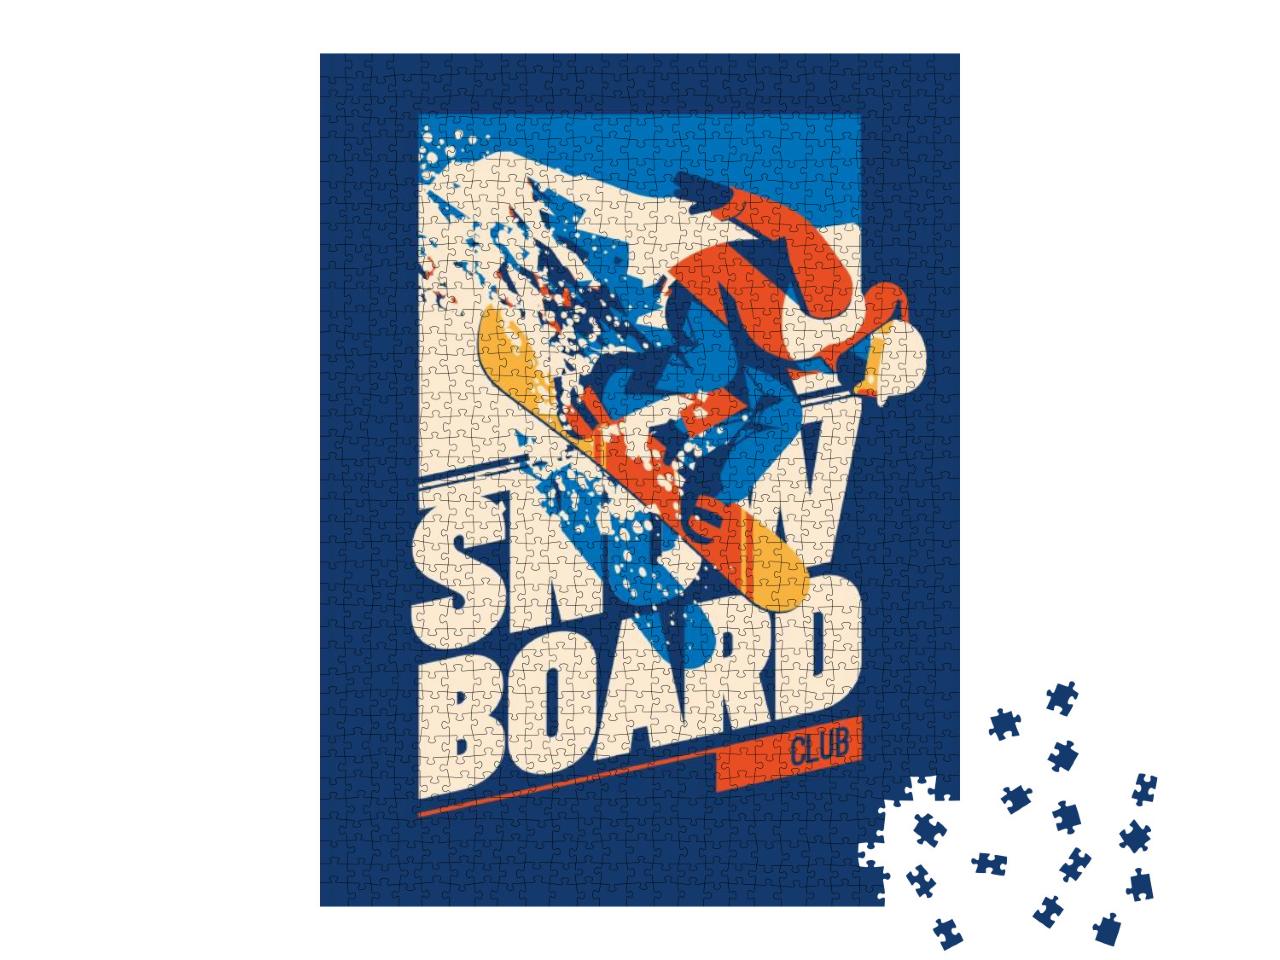 Freeride Snowboarder in Motion. Sport Poster or Emblem... Jigsaw Puzzle with 1000 pieces